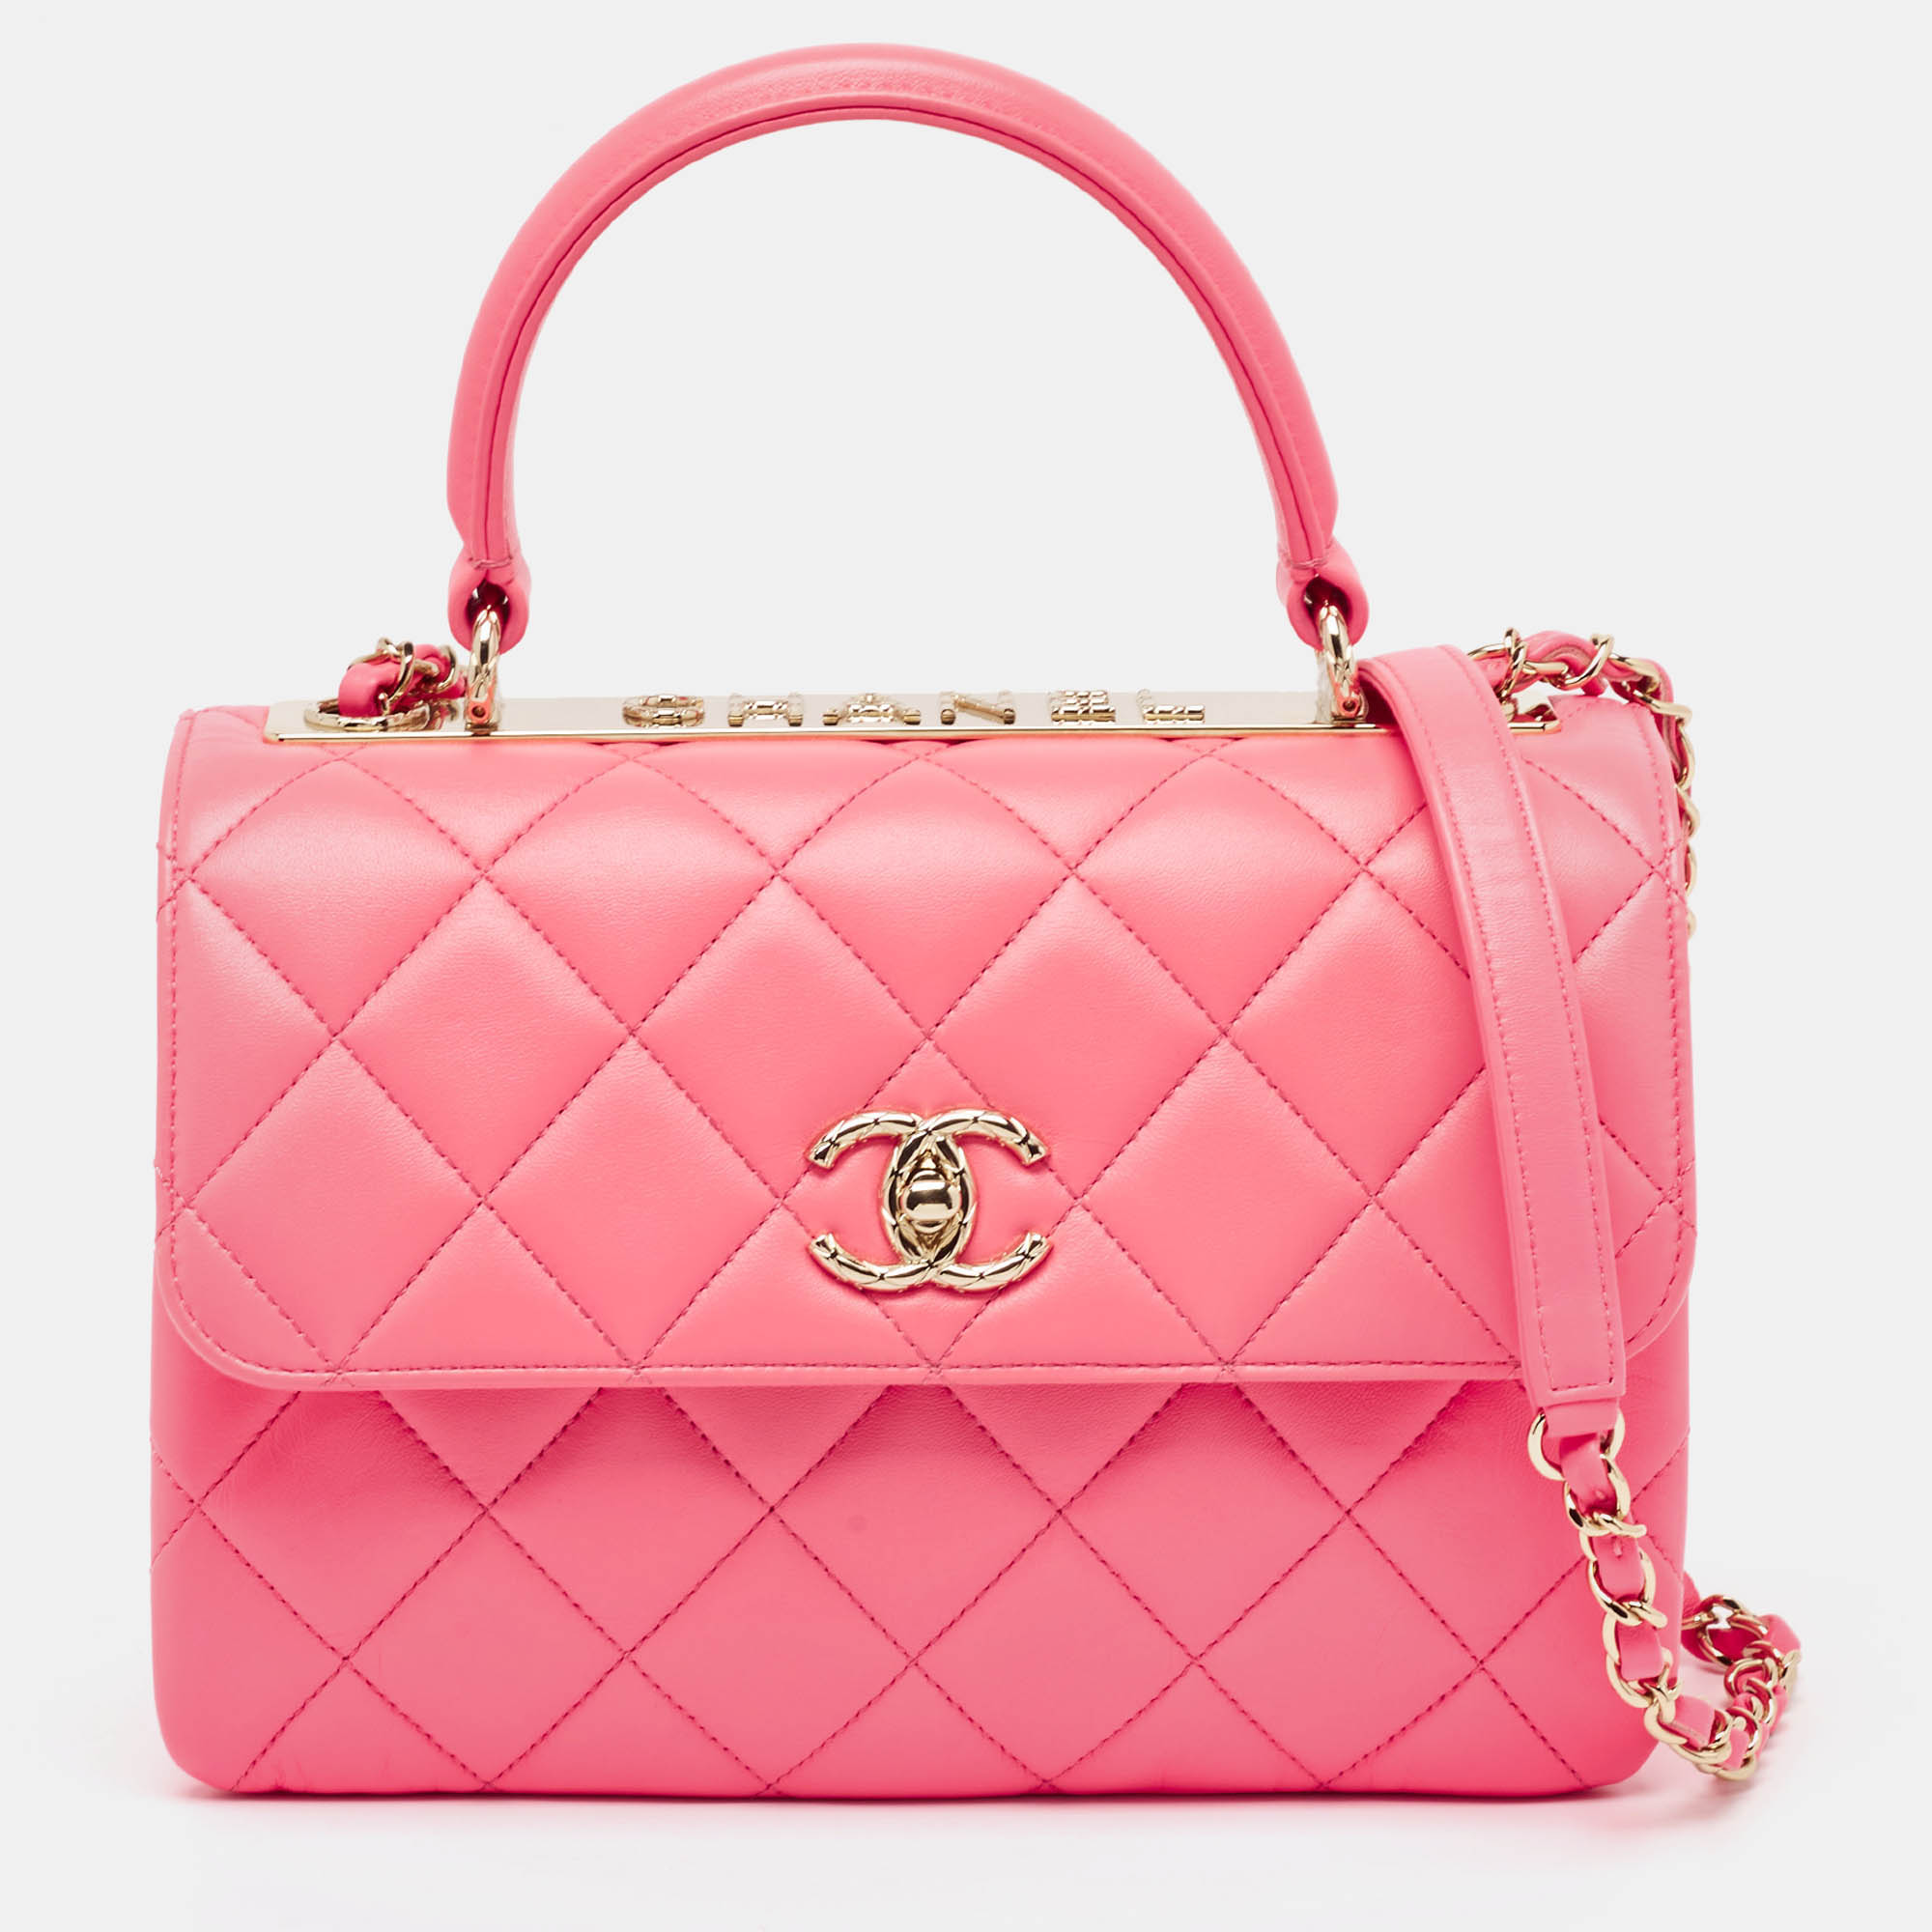 Chanel pink quilted leather small trendy cc top handle bag